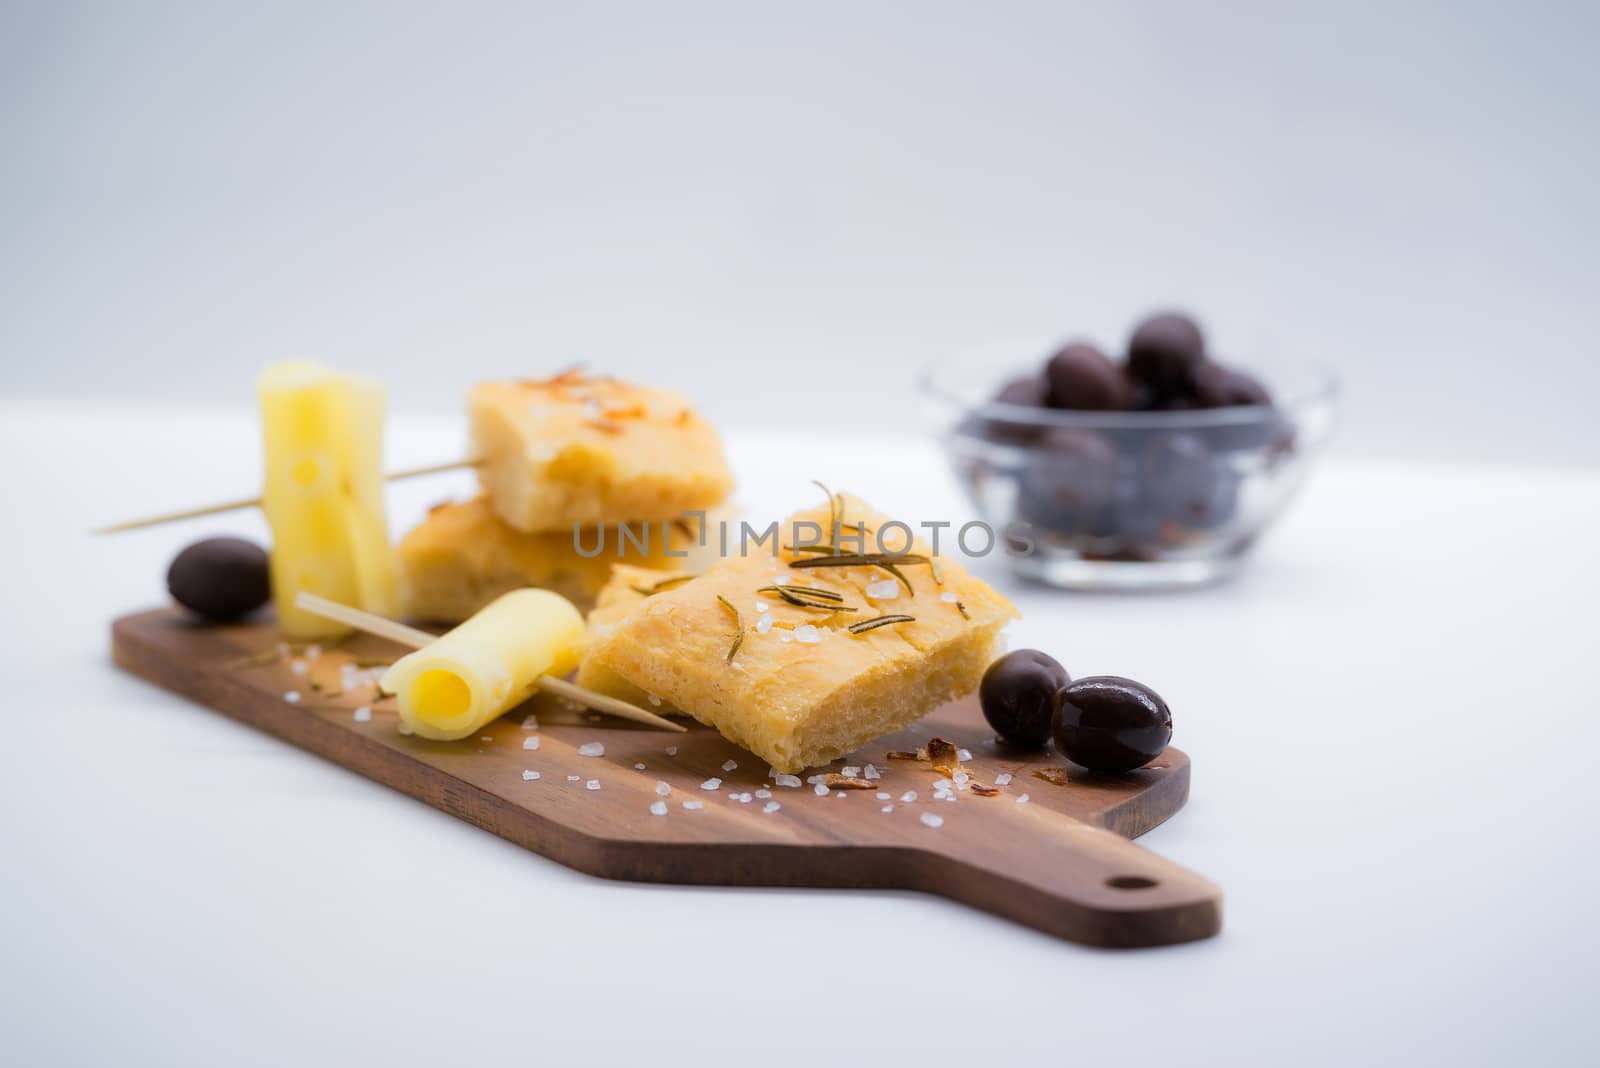 Italian focaccia with rosemary, olives and cheese by LuigiMorbidelli